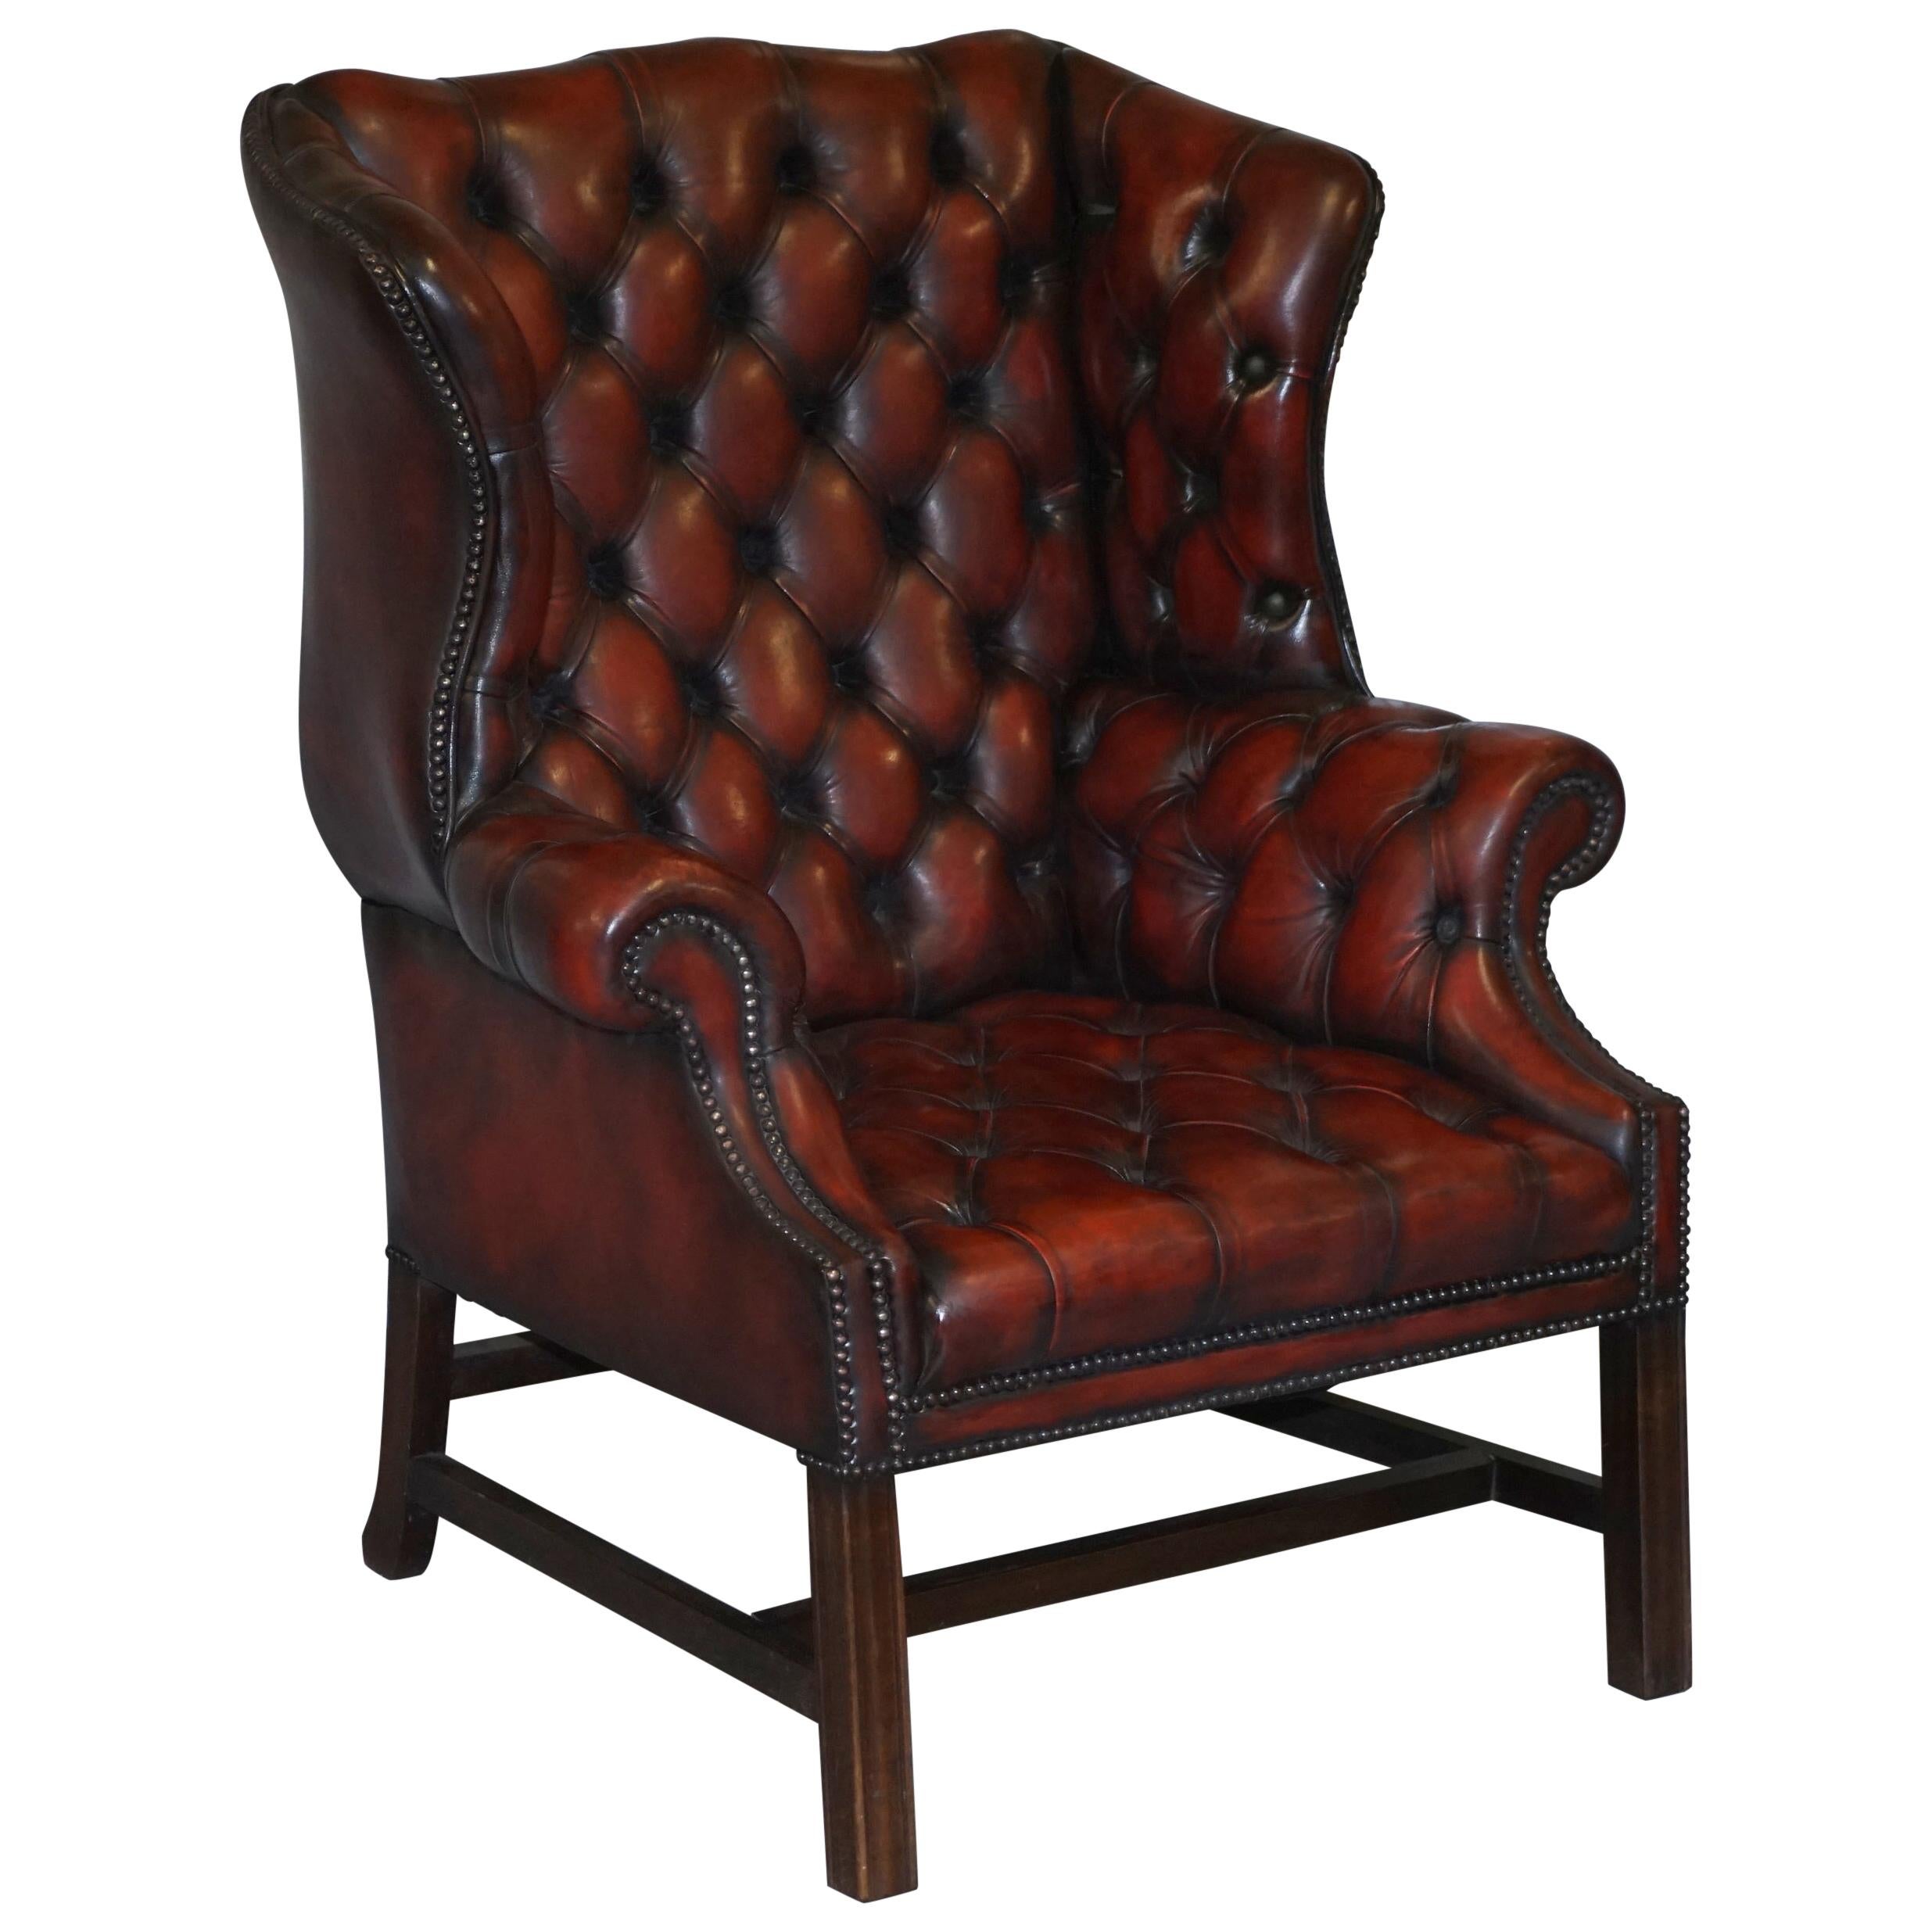 Vintage Restored Oxblood Leather Fully Tufted Chesterfield Wingback Armchair